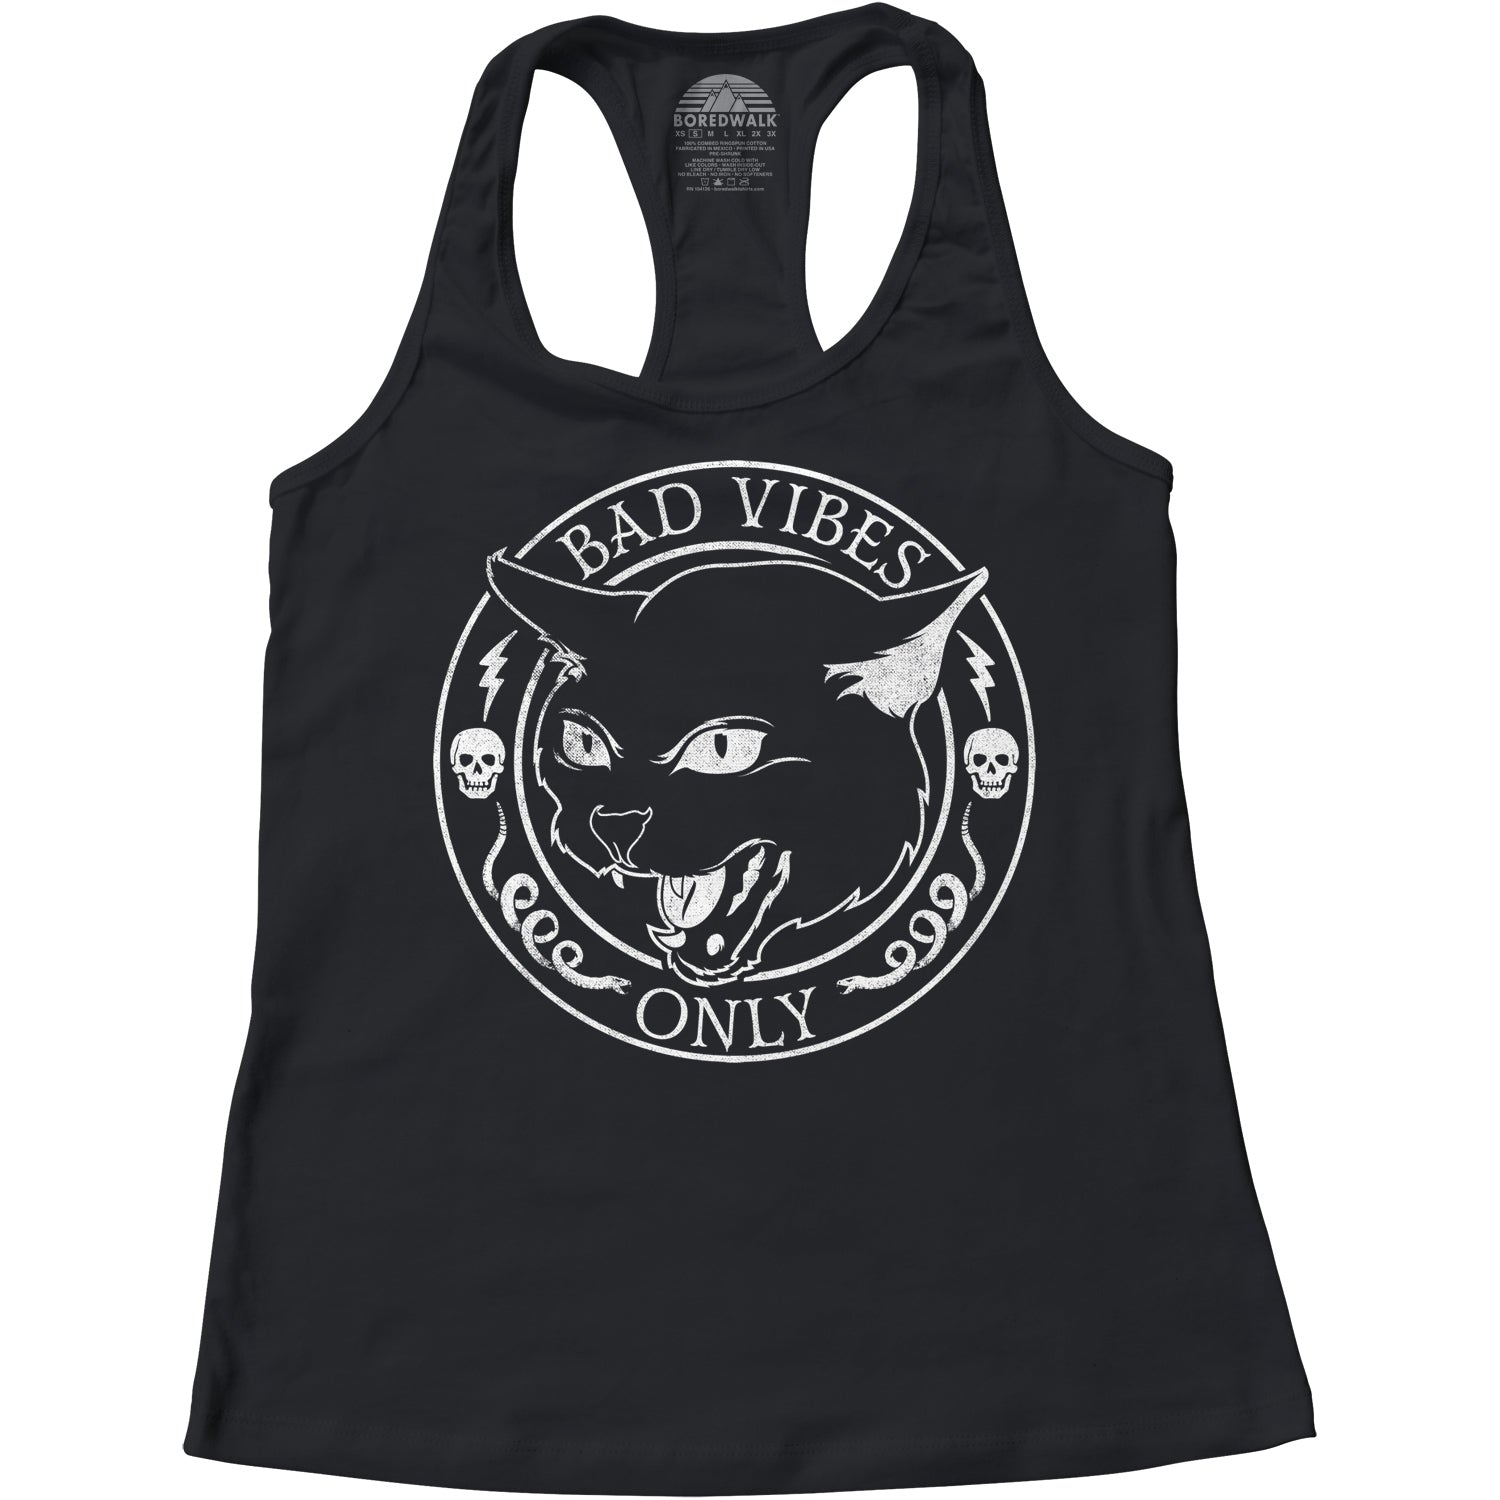 Women's Bad Vibes Only Racerback Tank Top